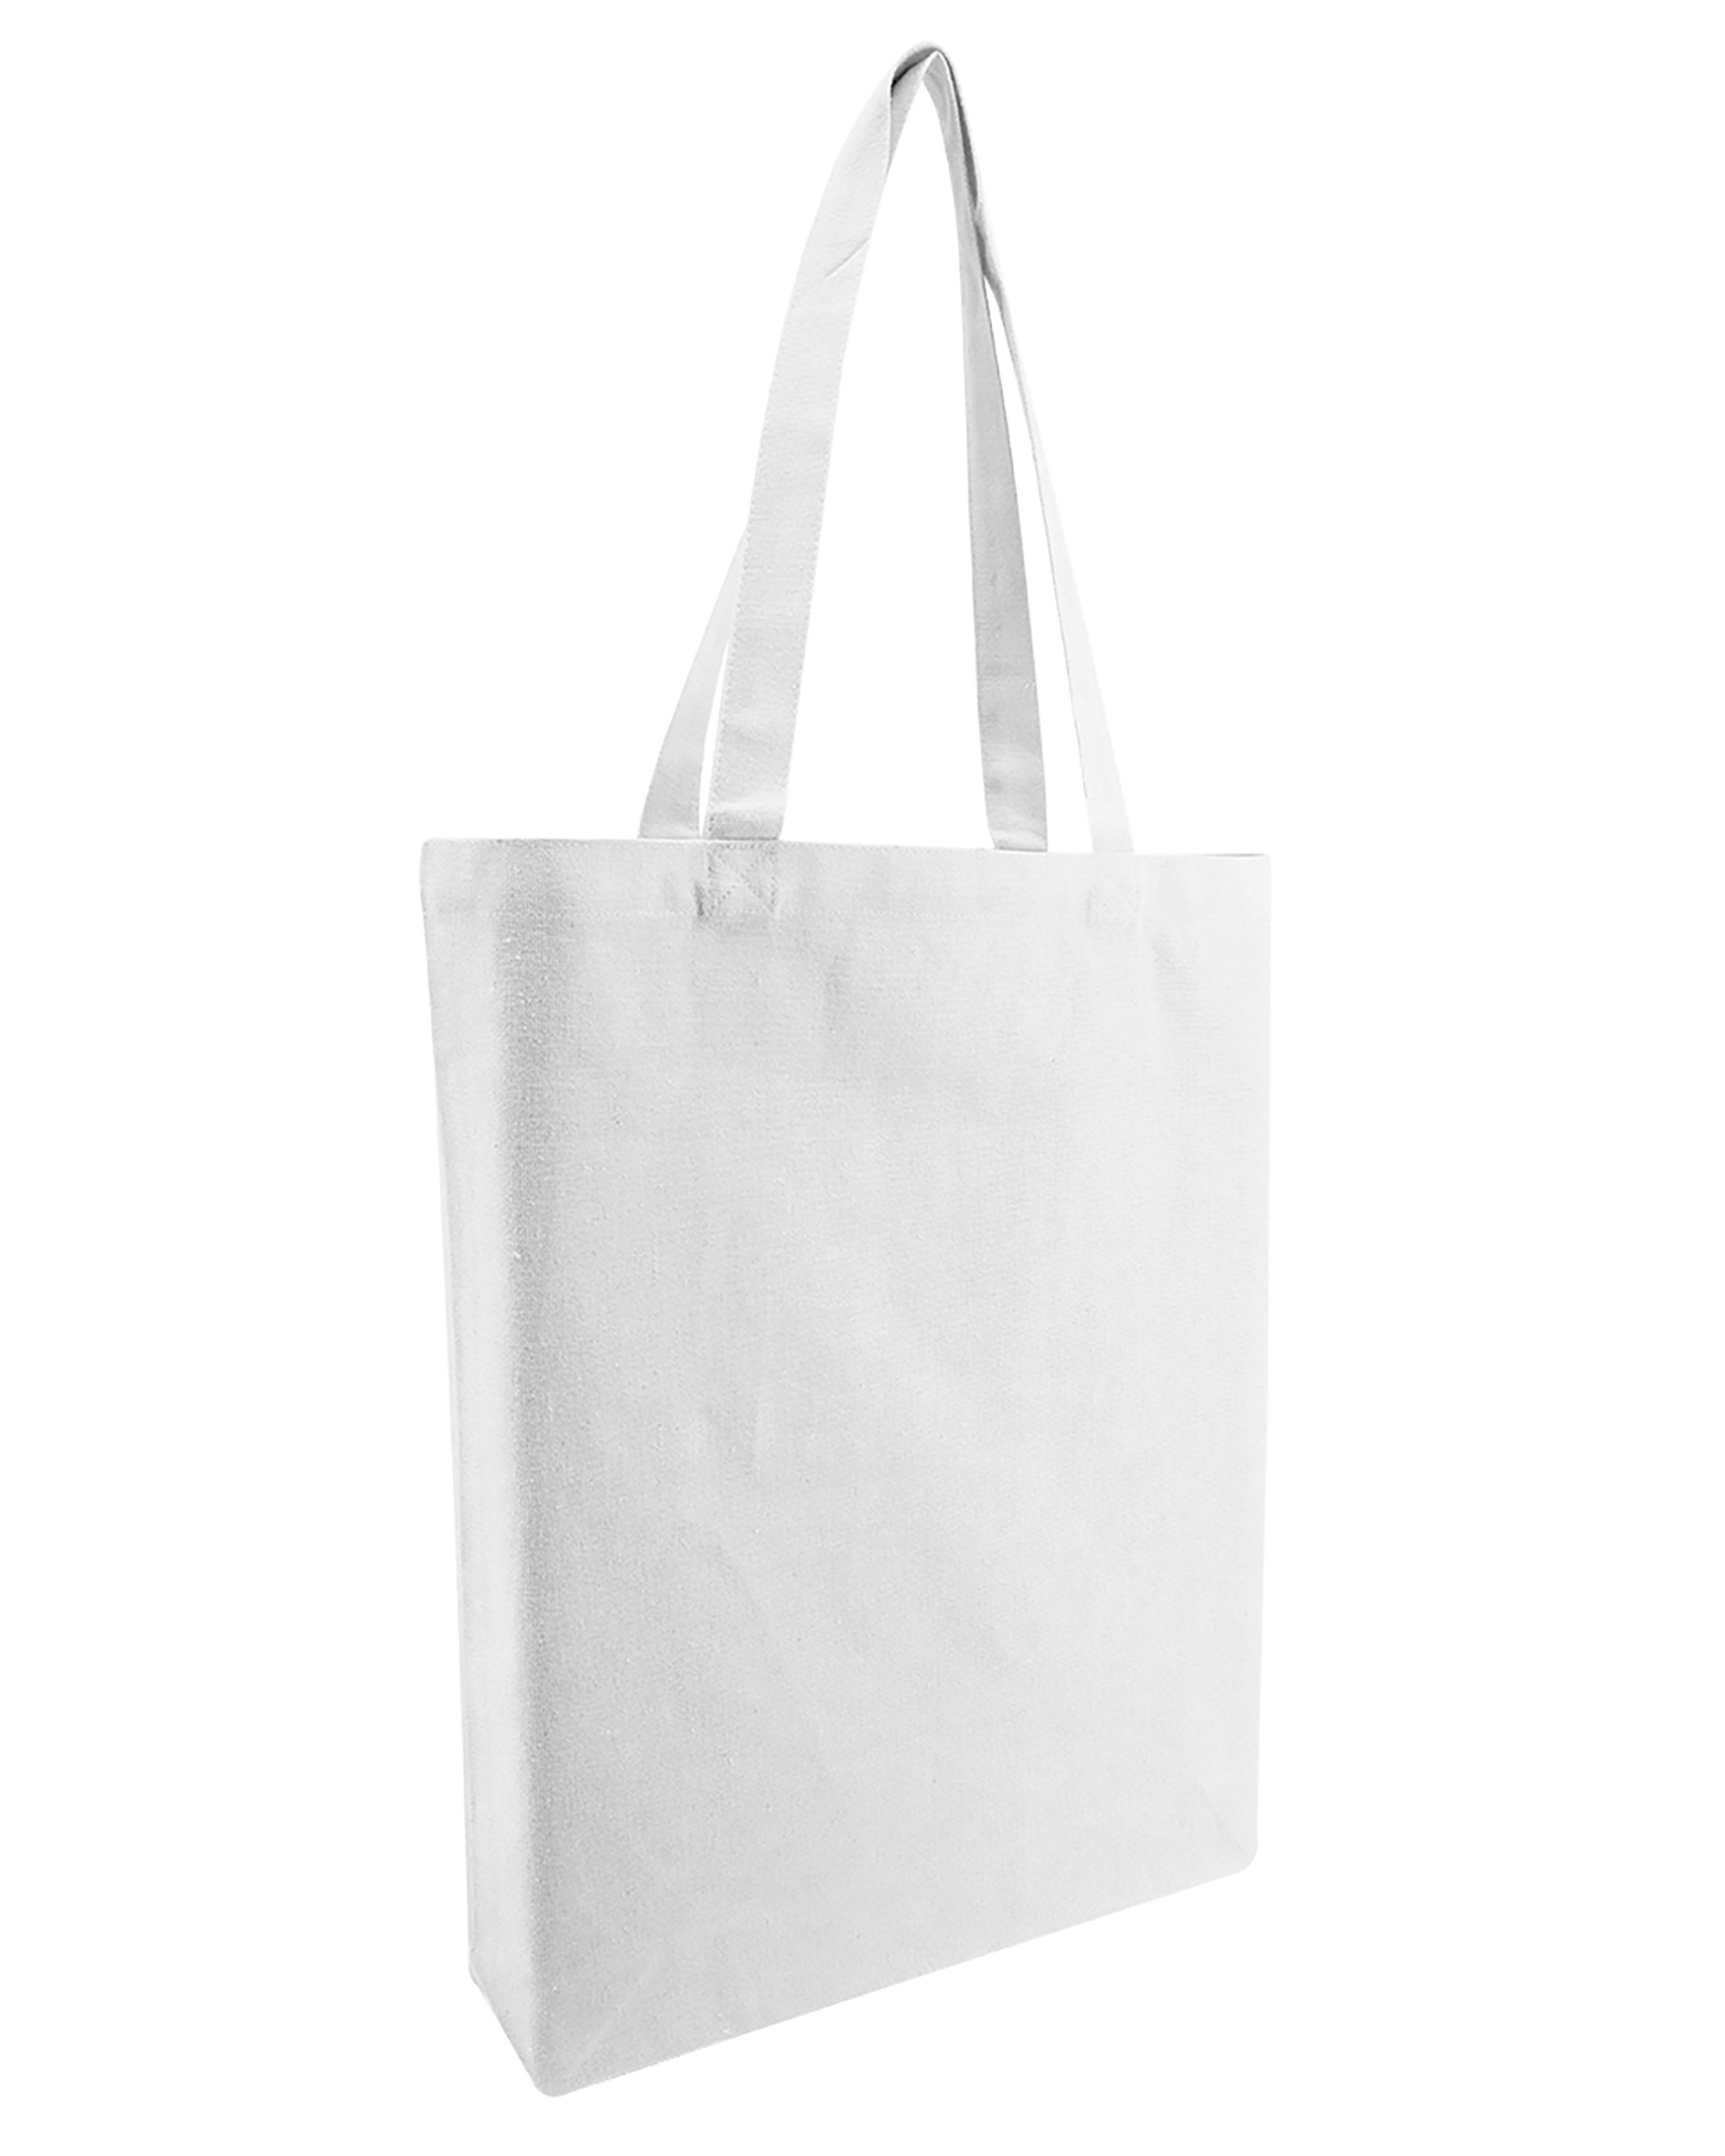 OAD® OAD106R Midweight Recycled Canvas Gusseted Tote